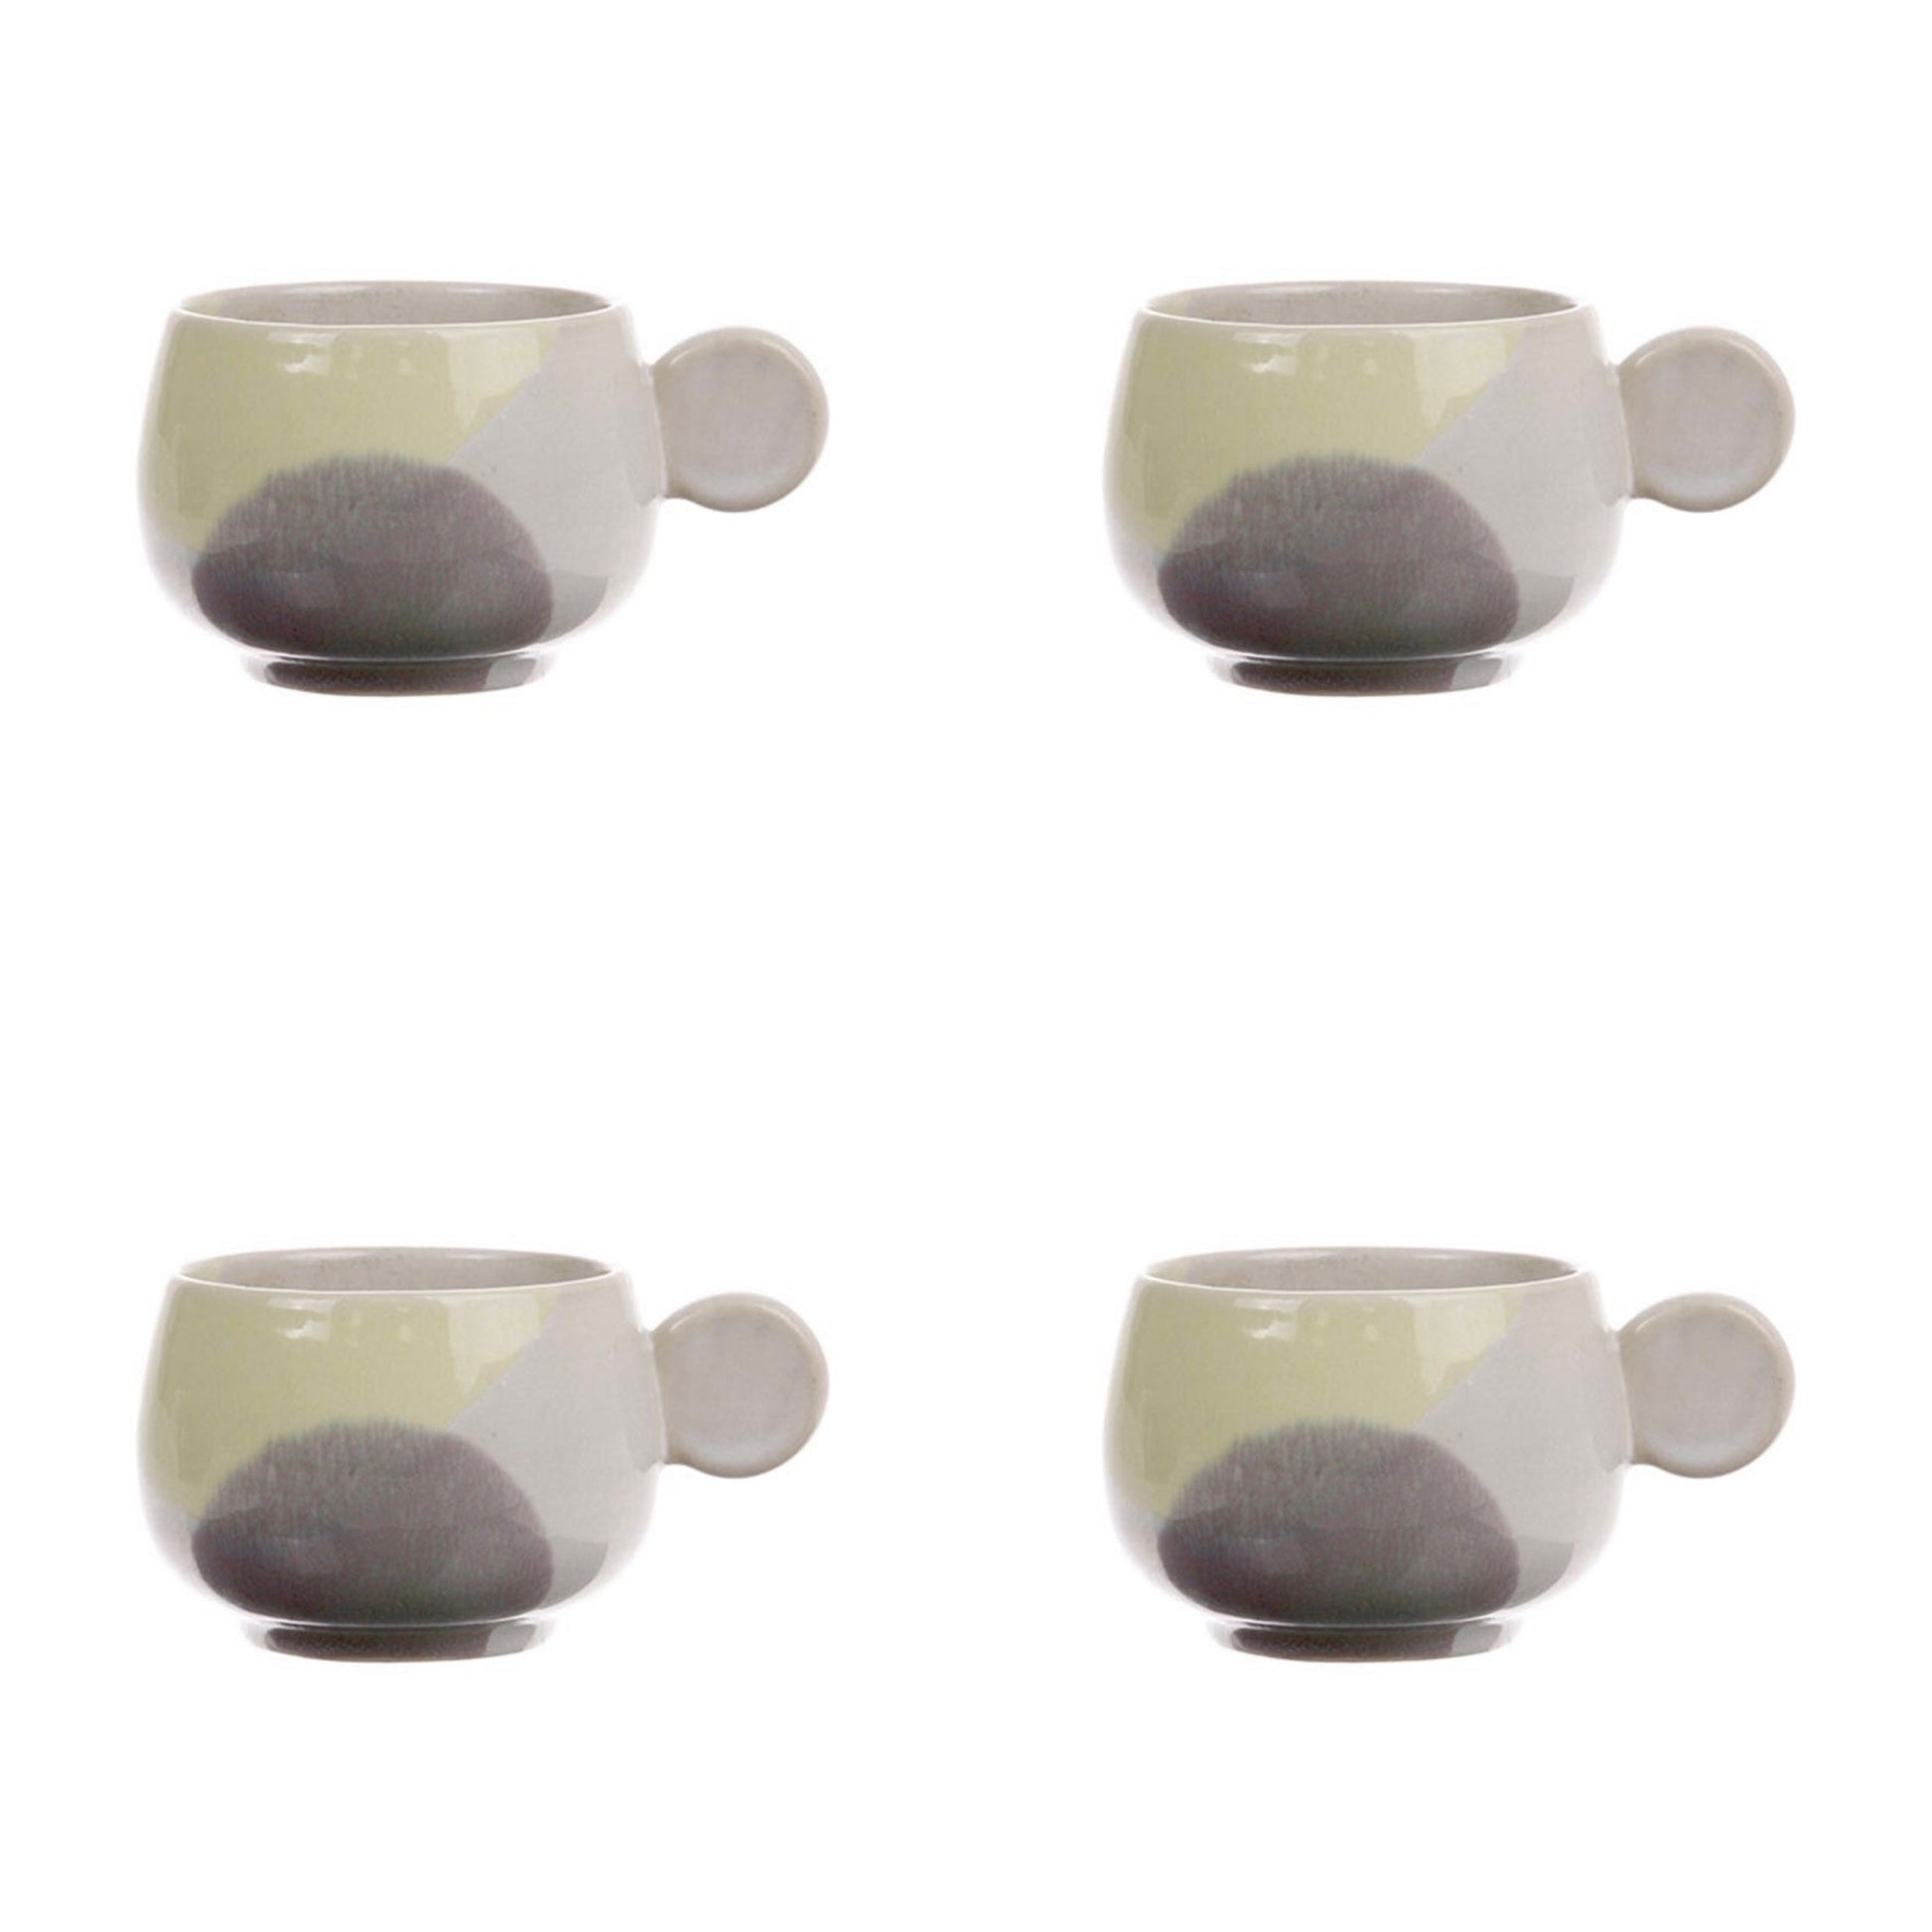 4 stoneware coffee cups with ear in yellow and lilac pastel colors